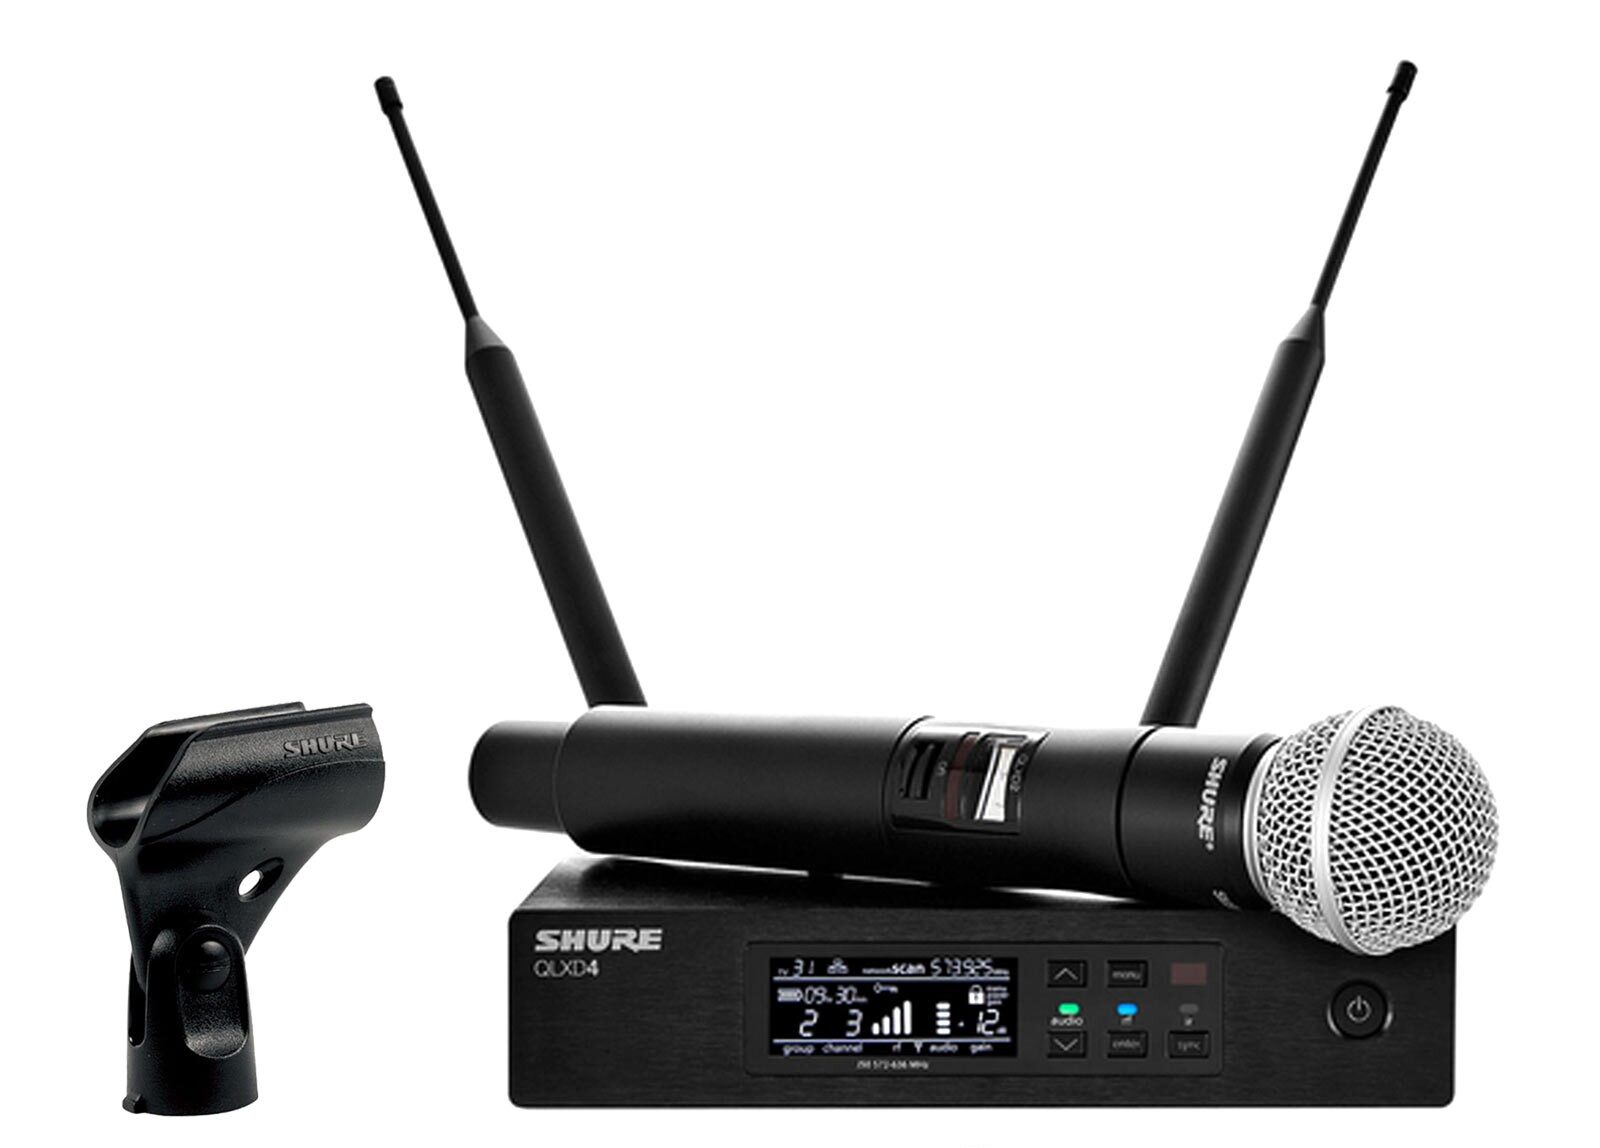 Microphone Rentals for Your Event